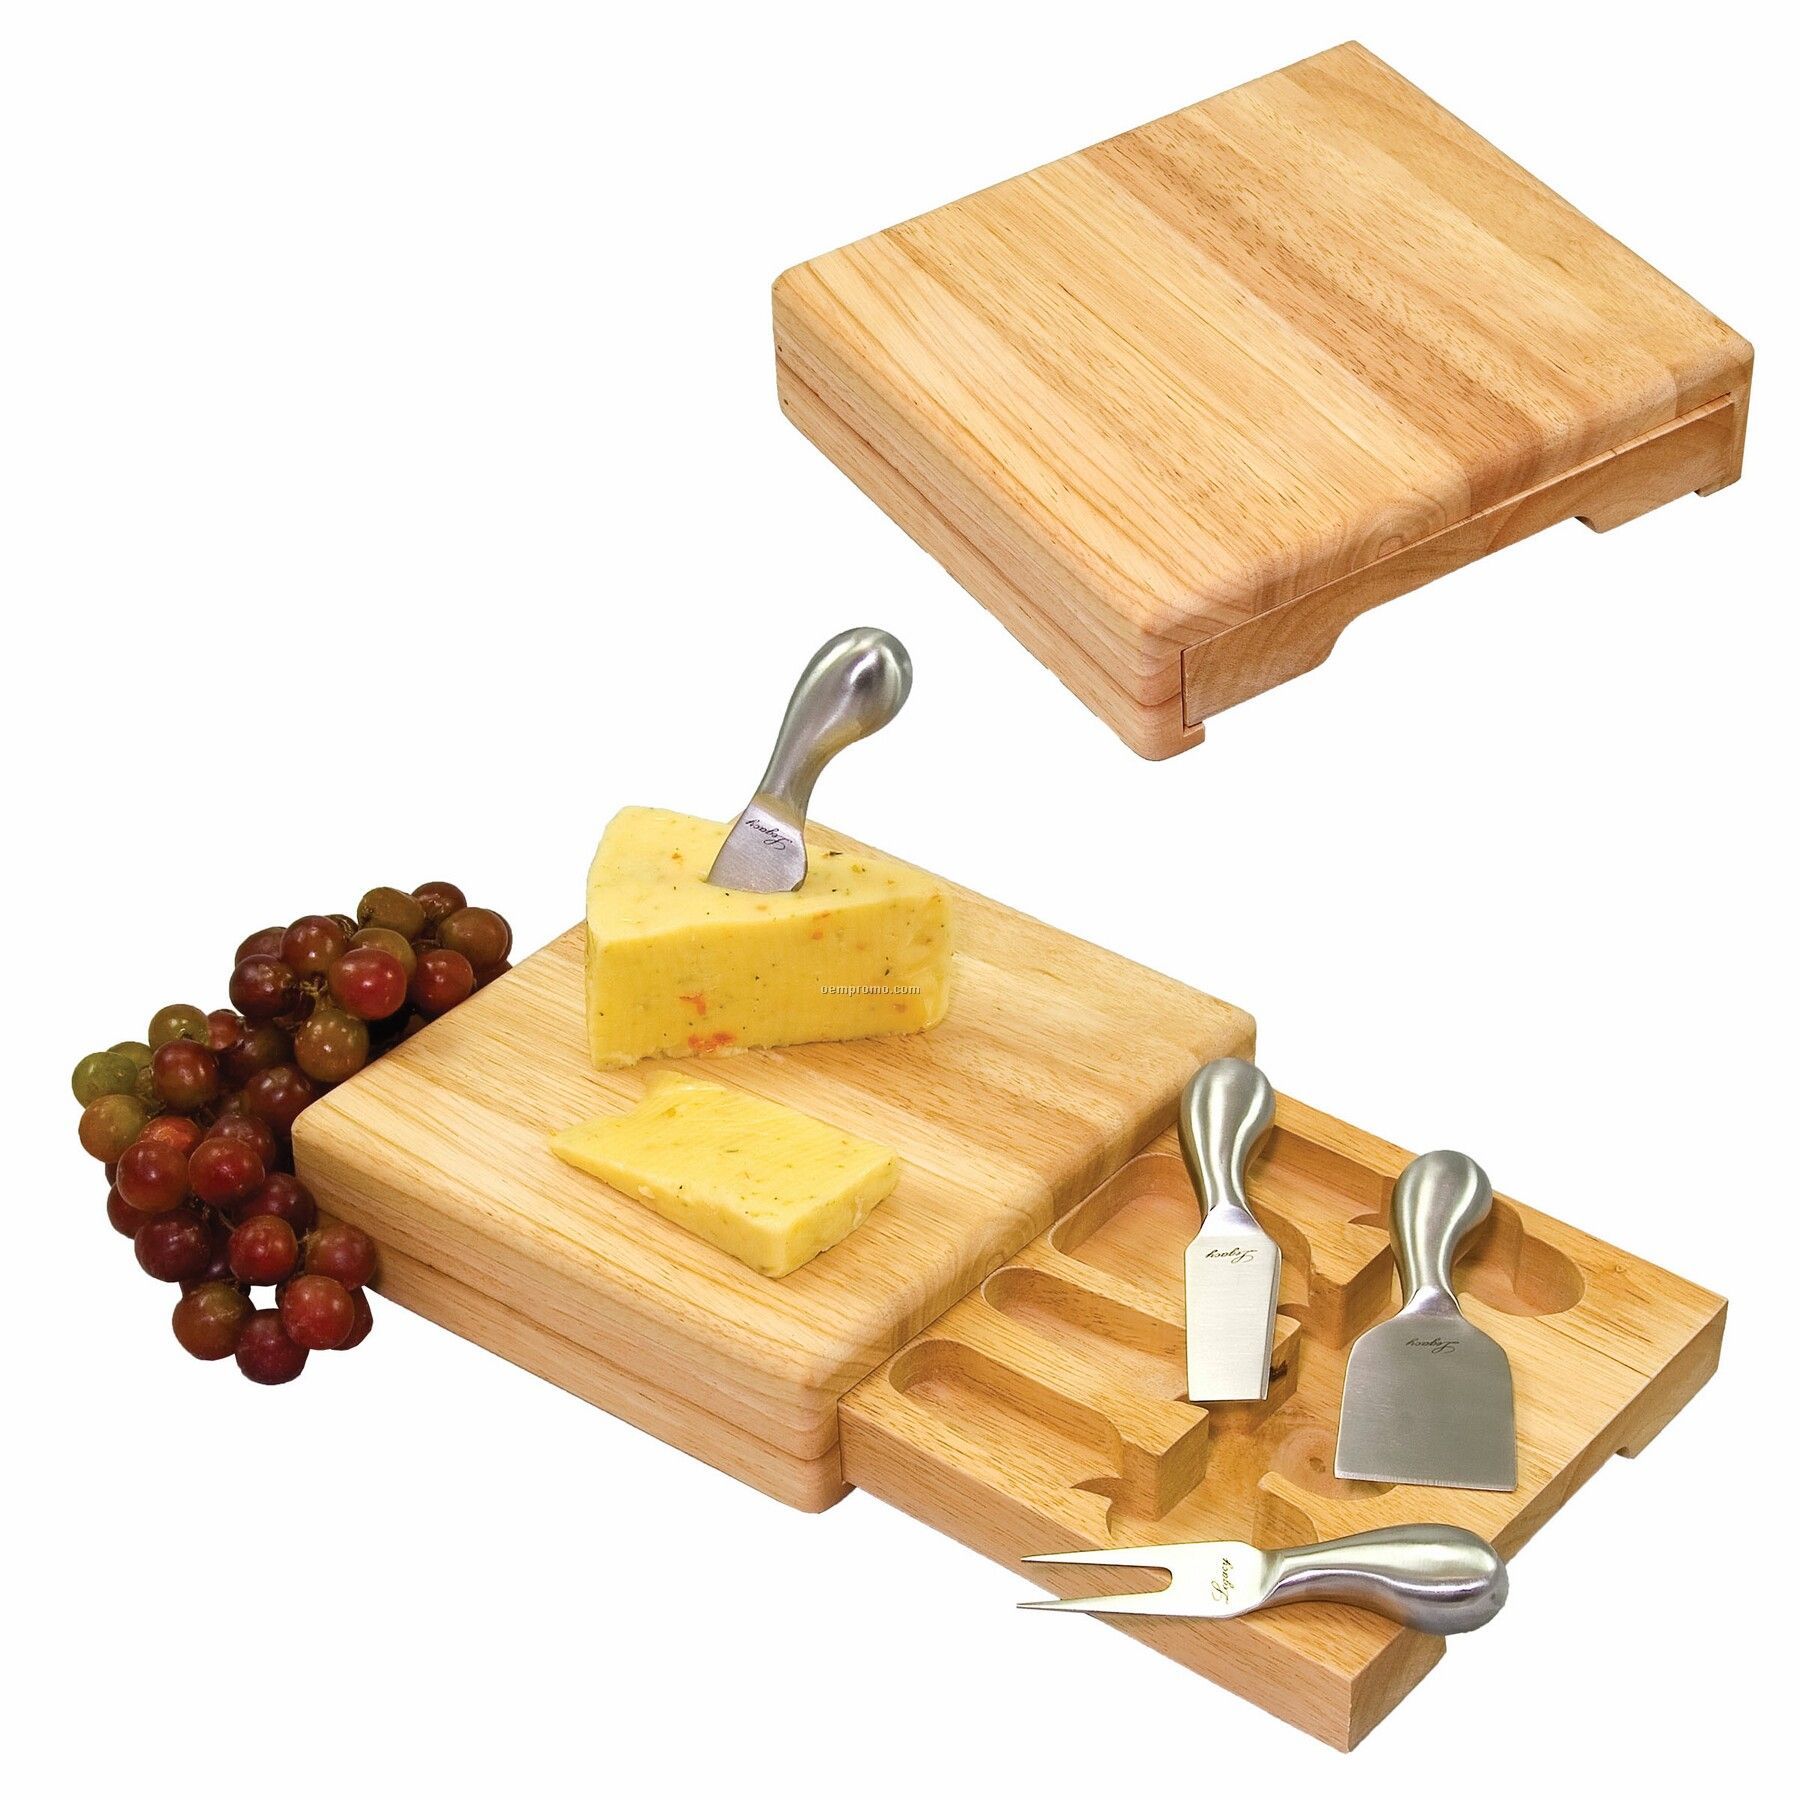 Festiva Square Rubber Wood Cutting Board W/ Drawer & 4 Cheese Tools